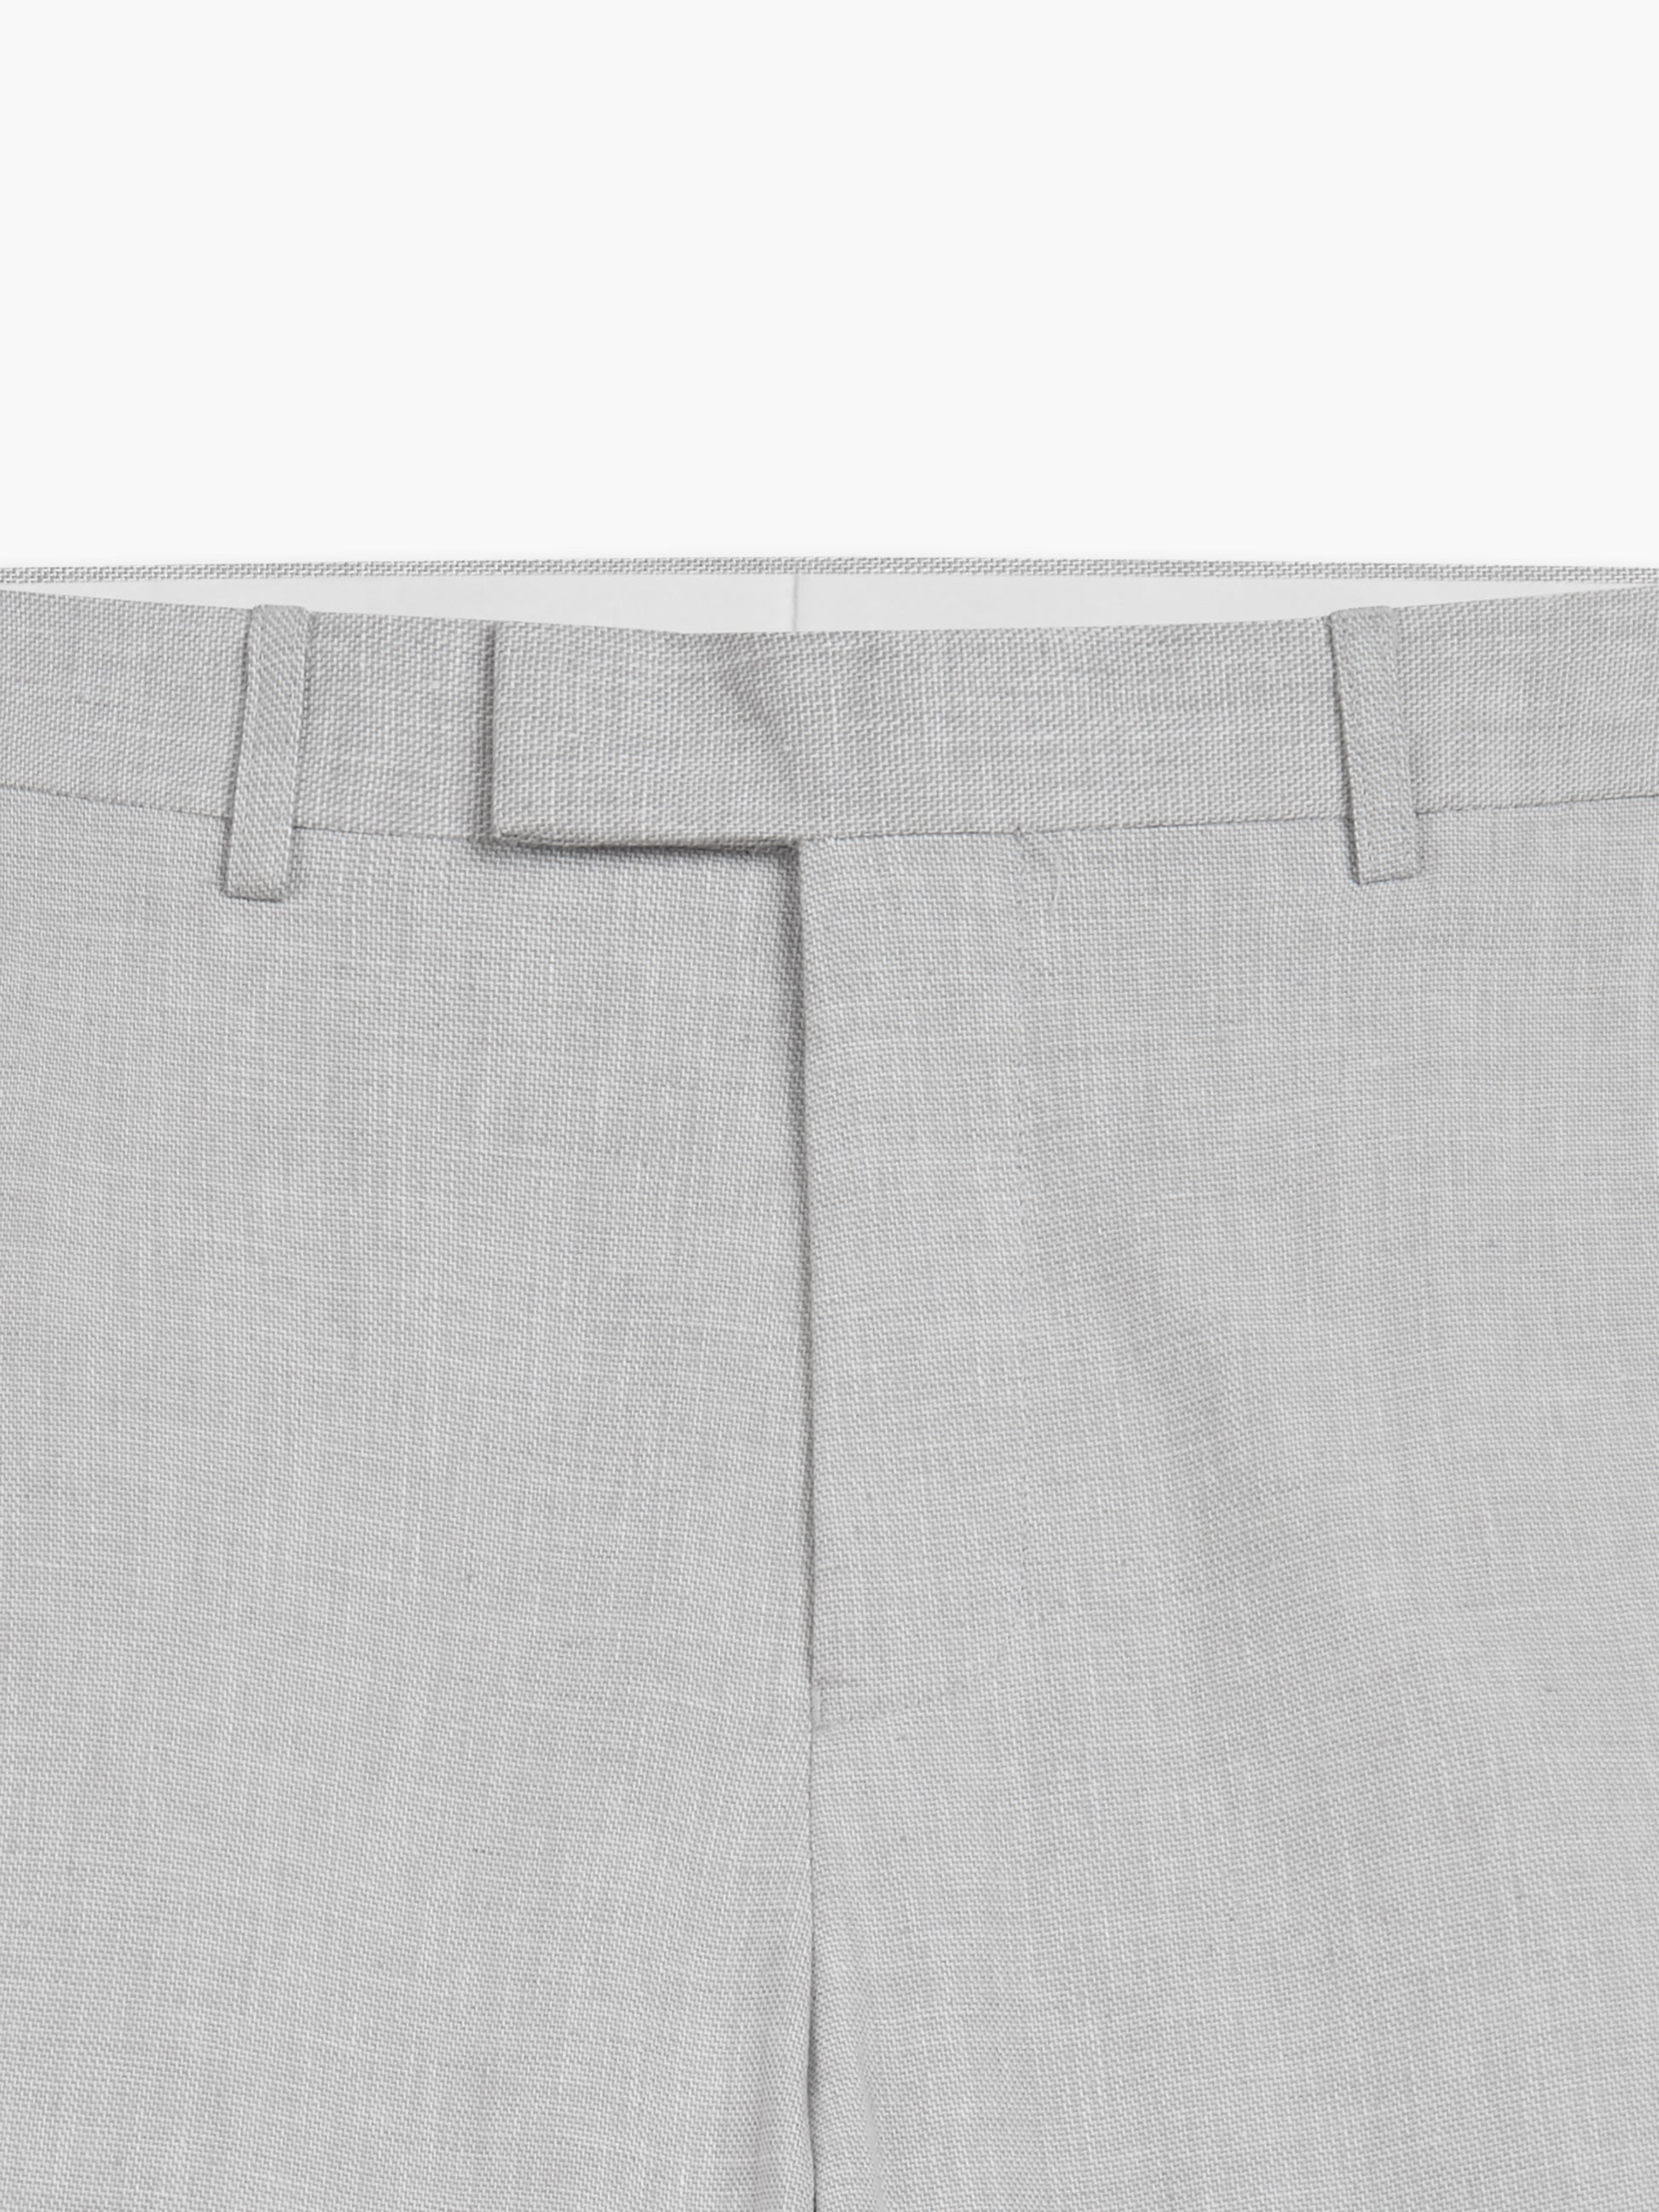 Image 7 of Slim Fit Linen Suit Trousers in Light Grey